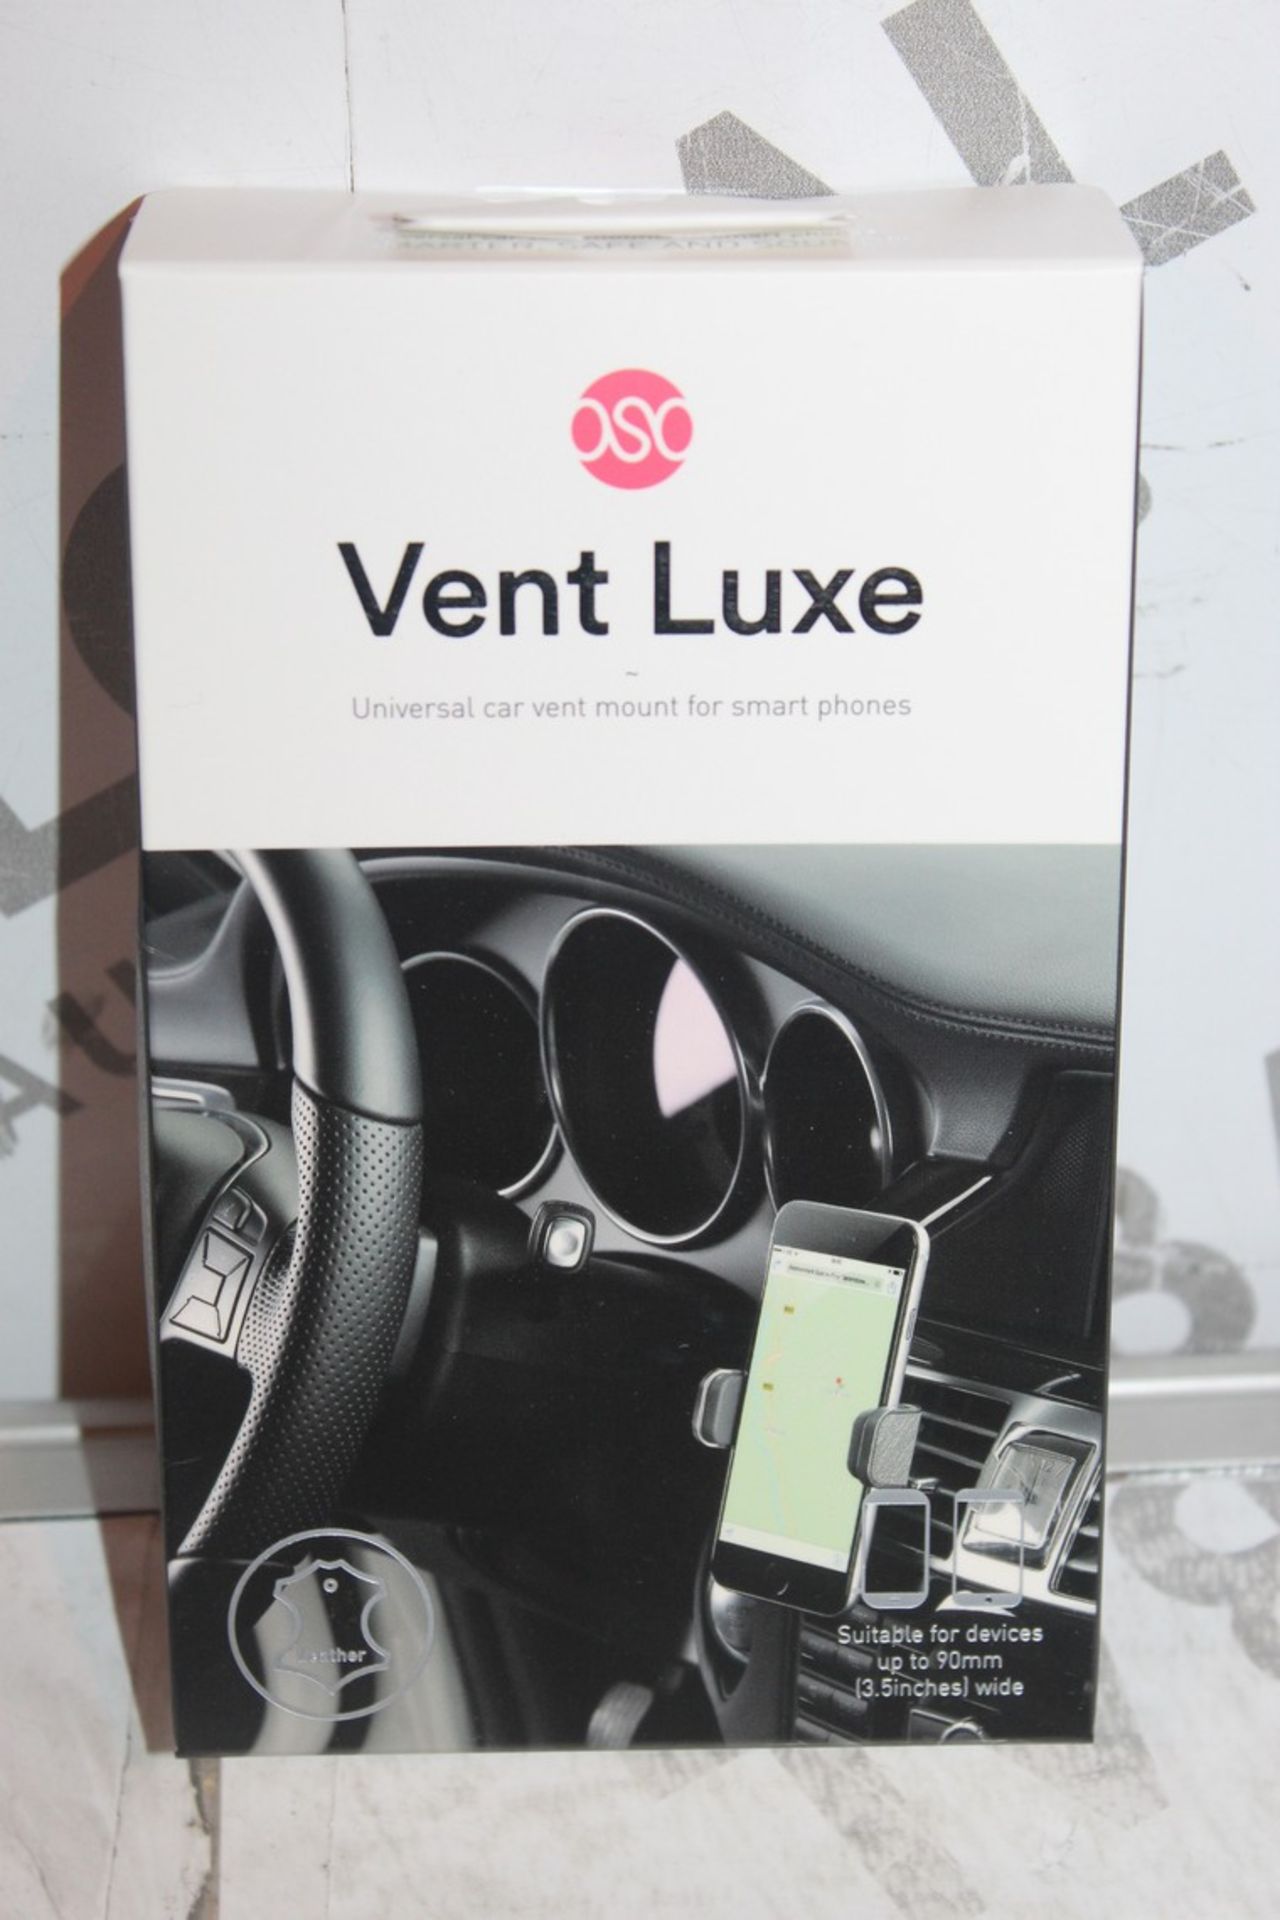 Lot to Contain 5 Brand New Oso Ventluxe Universal Car Vents for Smart Phones RRP £110